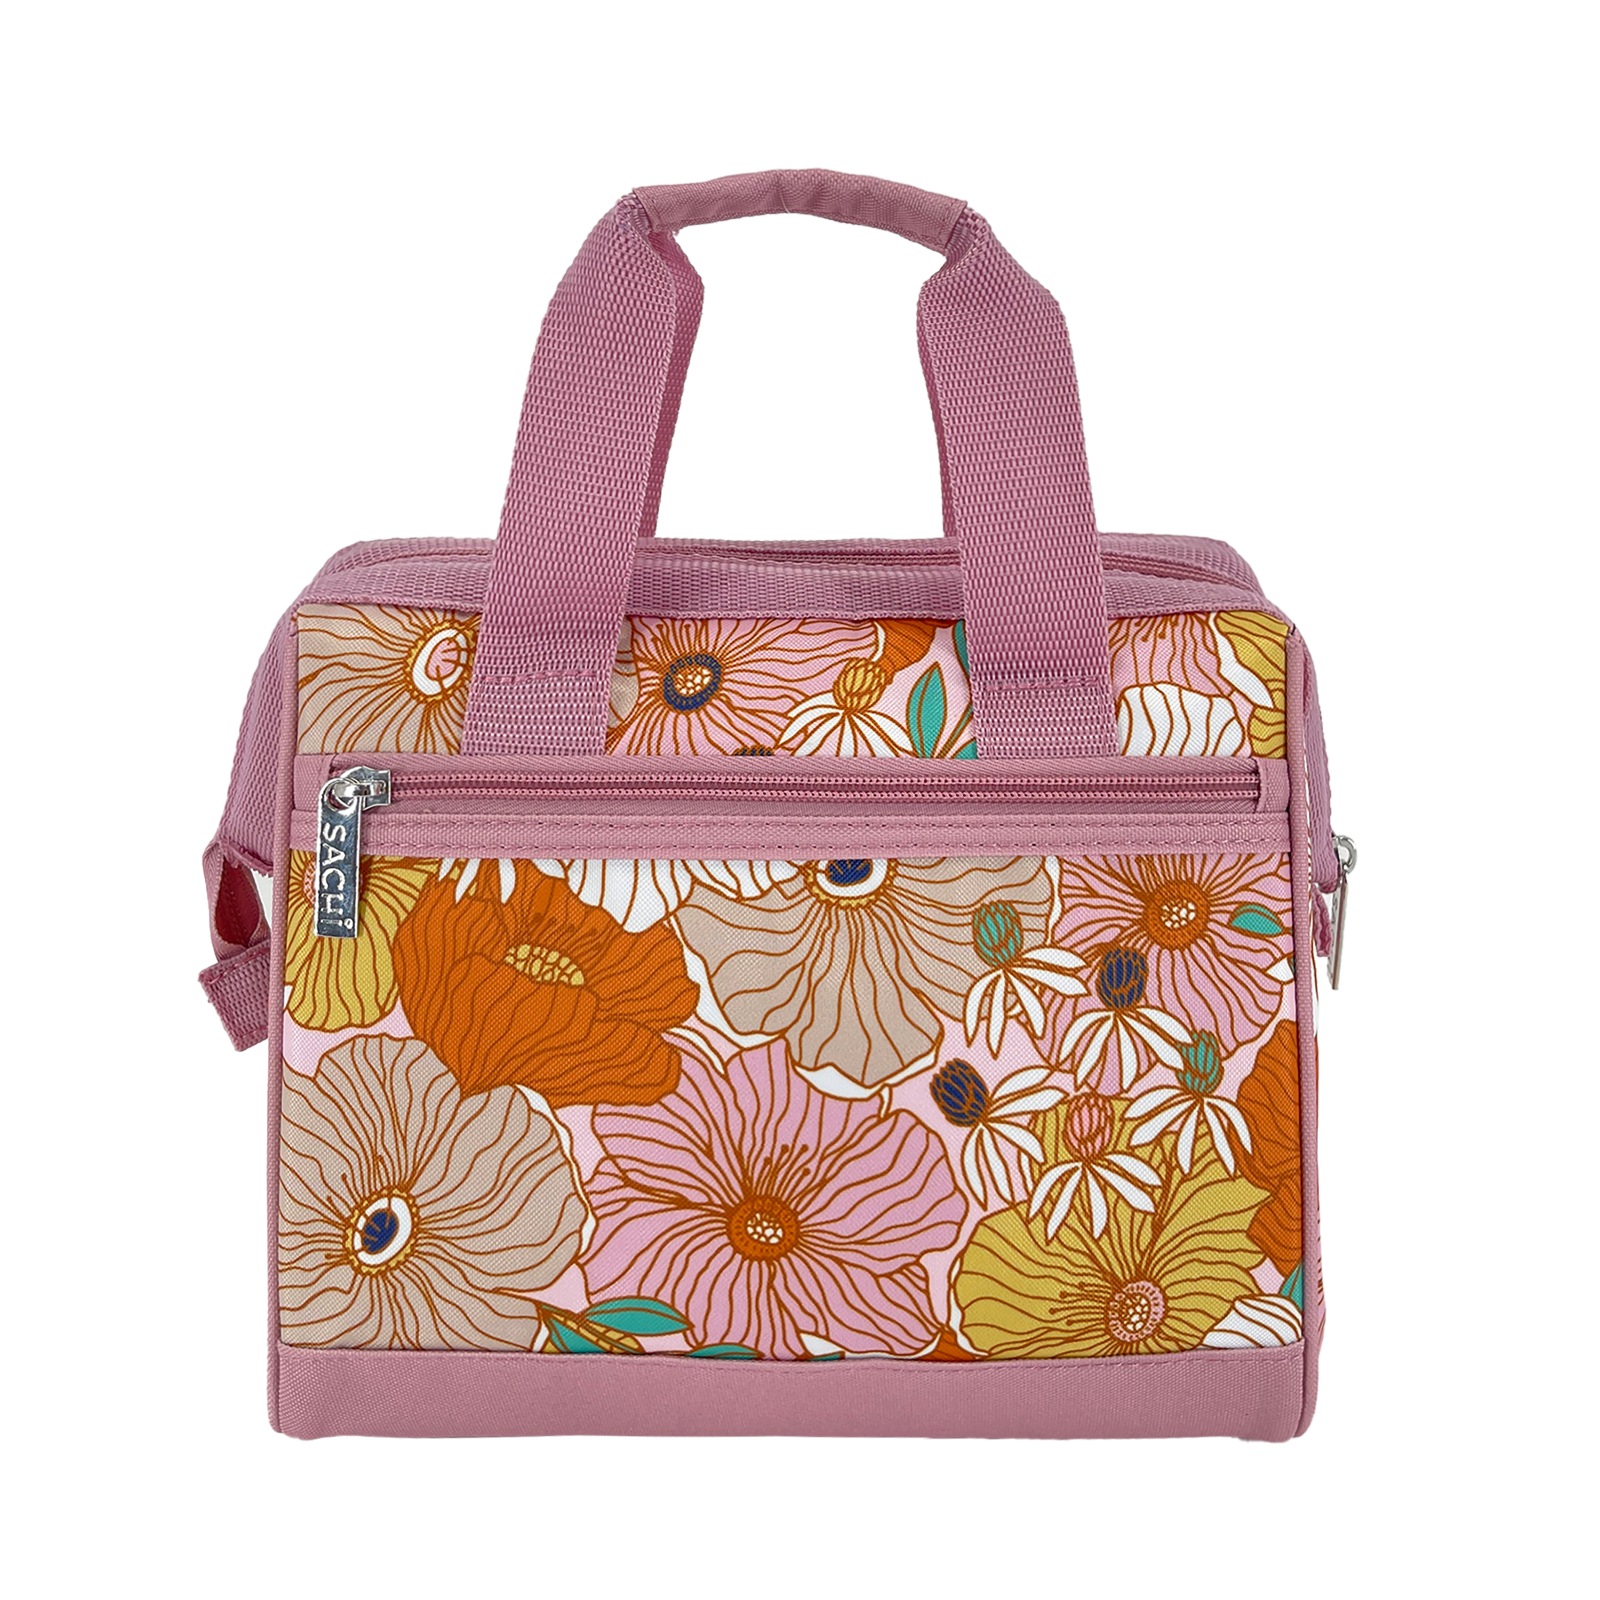 Sachi Style 34 Insulated Lunch Bag Retro Floral